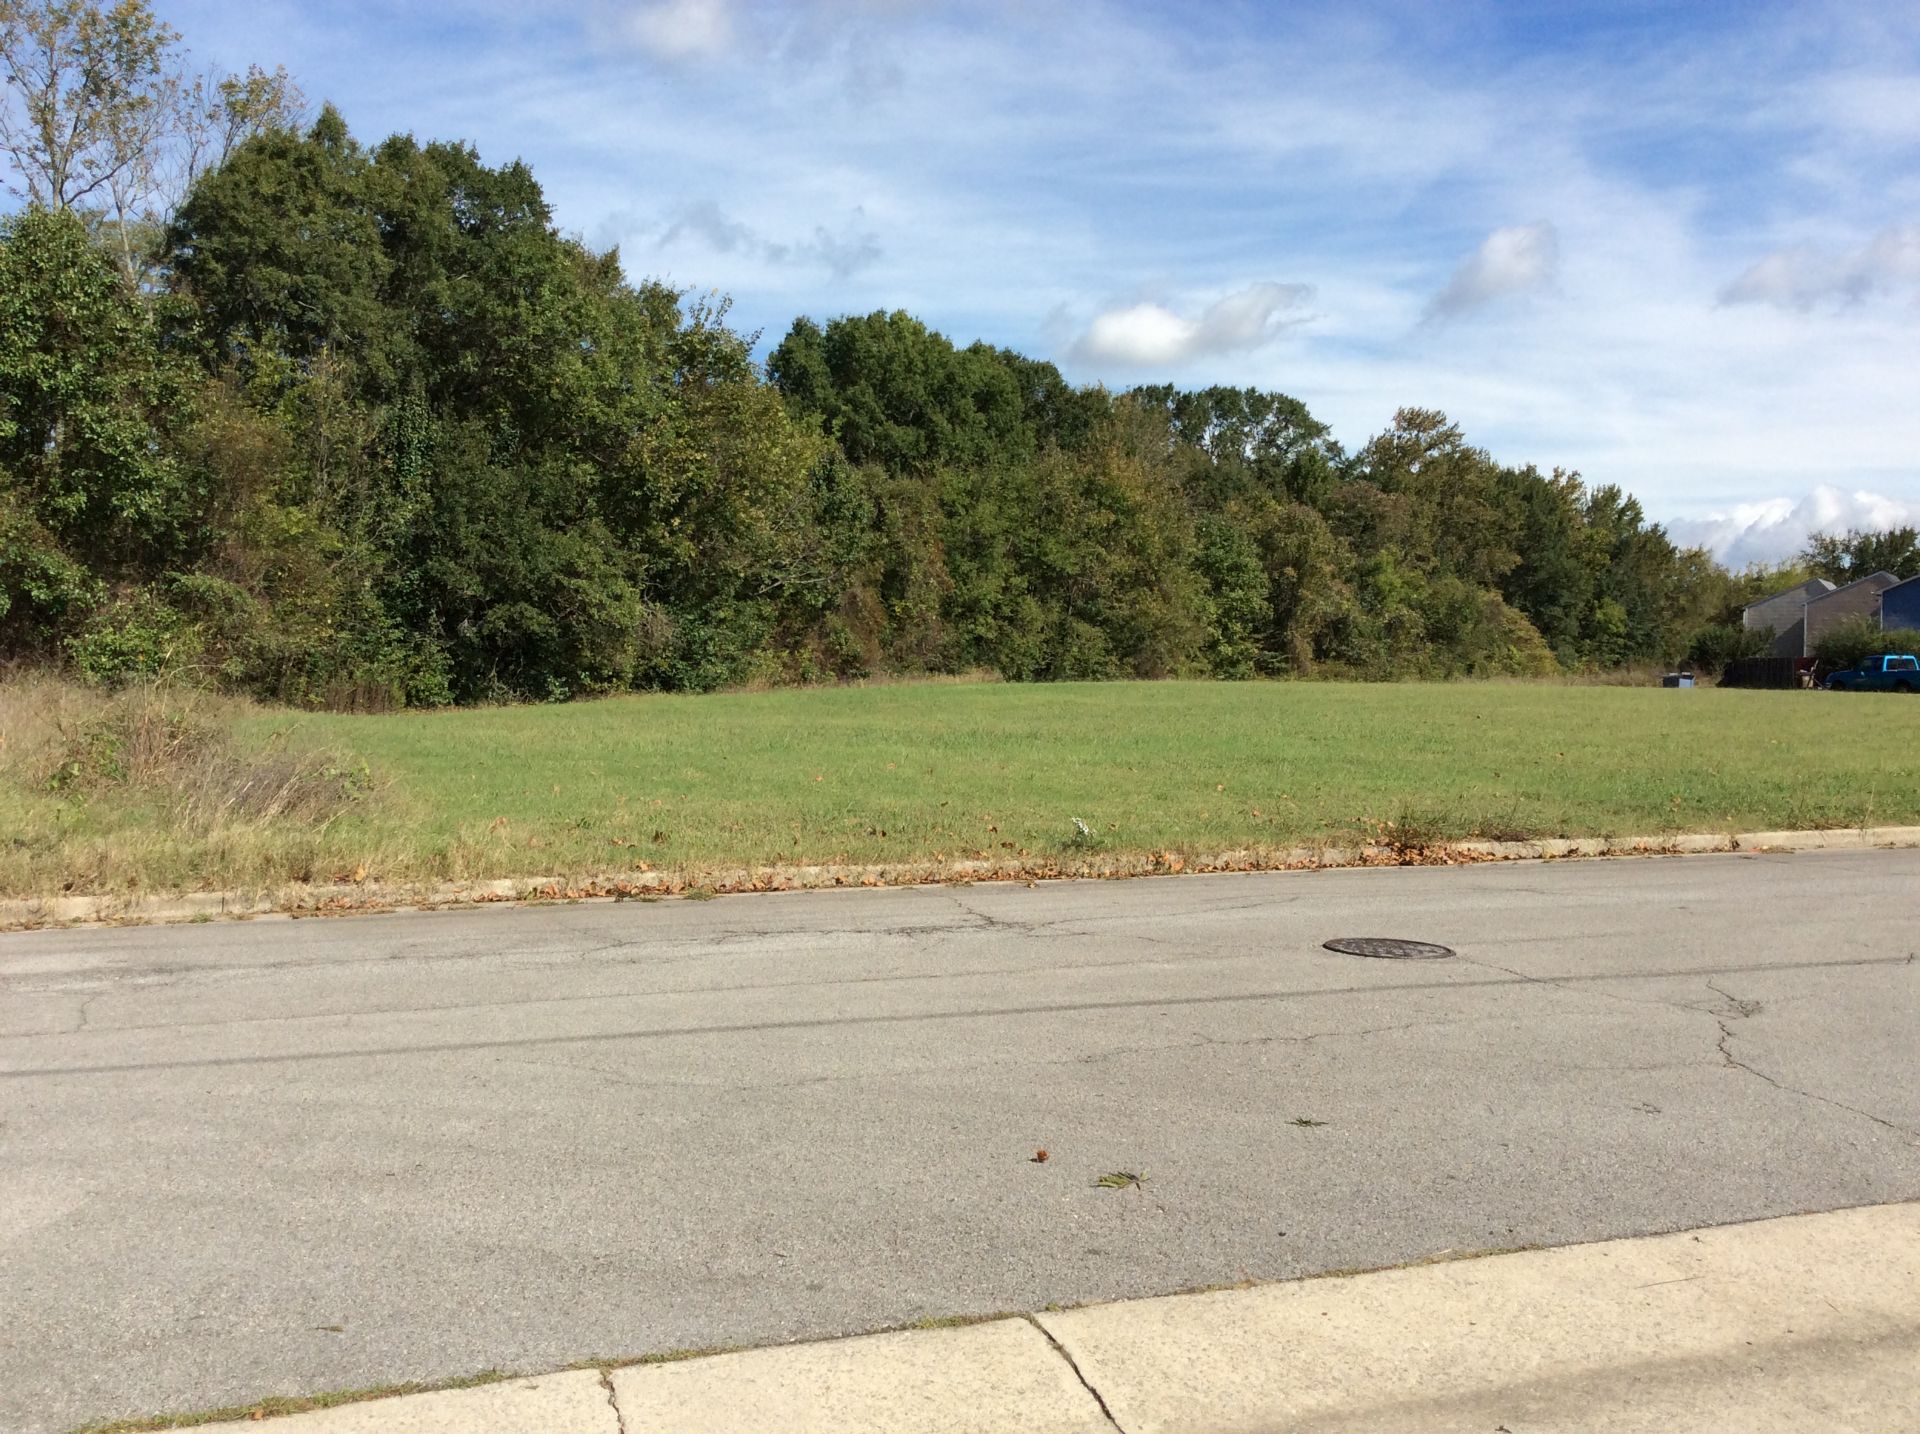 6 Acres± Commerical Lot - Hemingway Drive Decatur, Alabama.  The property is currently zoned R-6. - Image 7 of 7